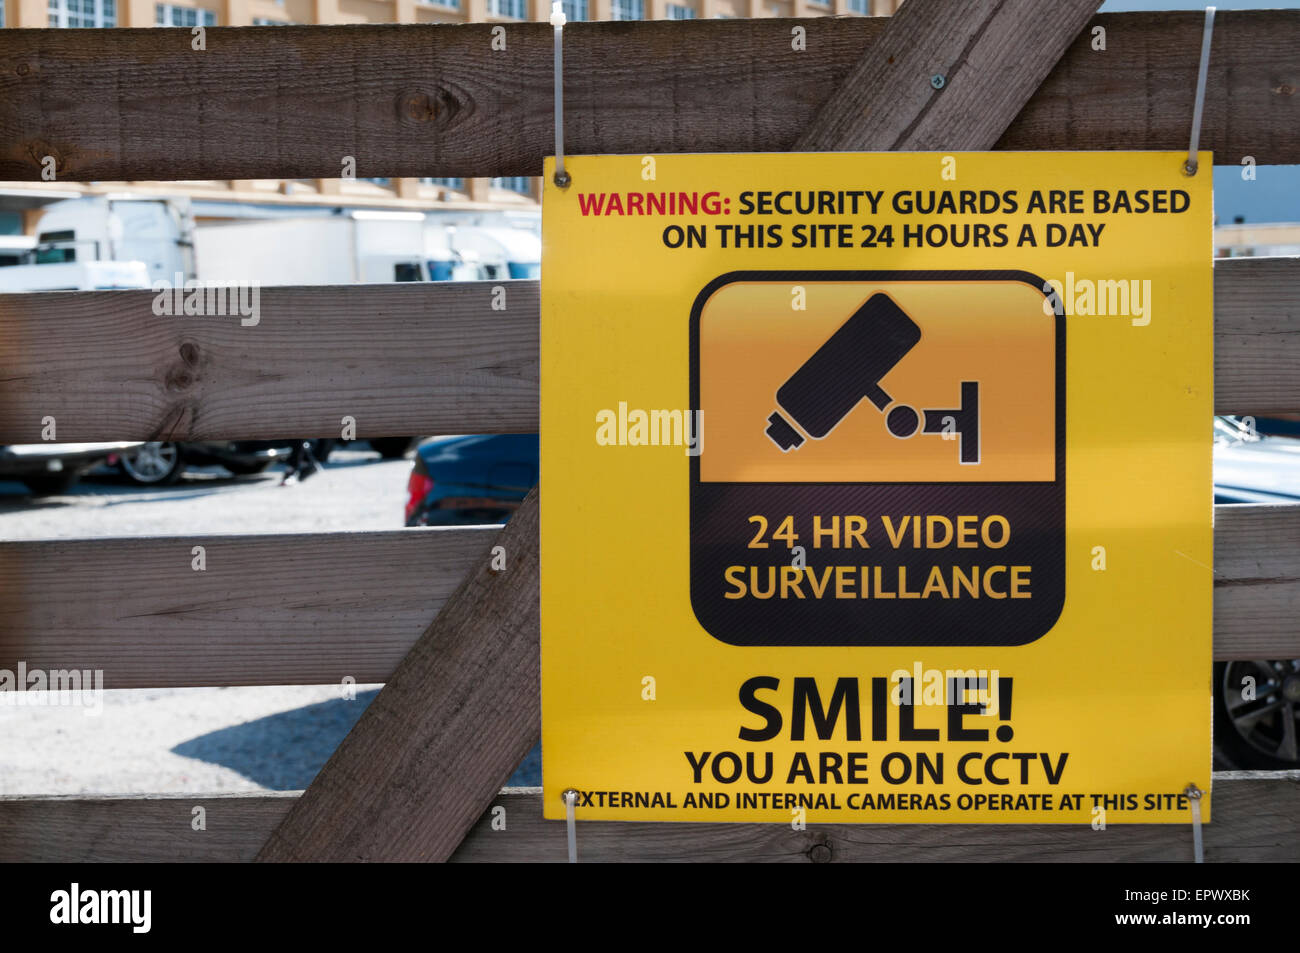 24 Hr Video Surveillance Smile! You are on CCTV sign. Stock Photo